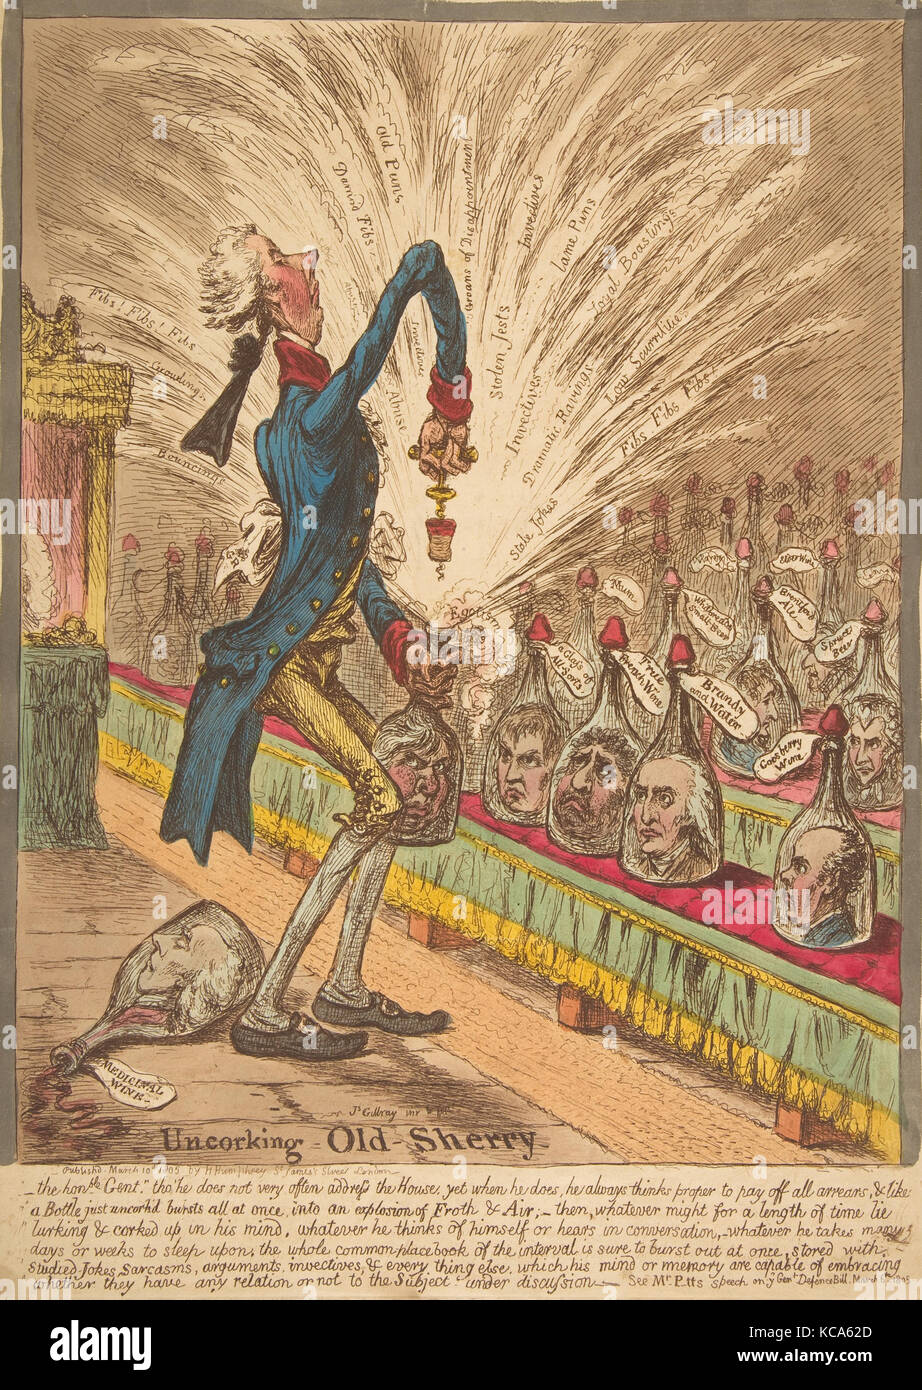 Uncorking Old Sherry, James Gillray, March 10, 1805 Stock Photo